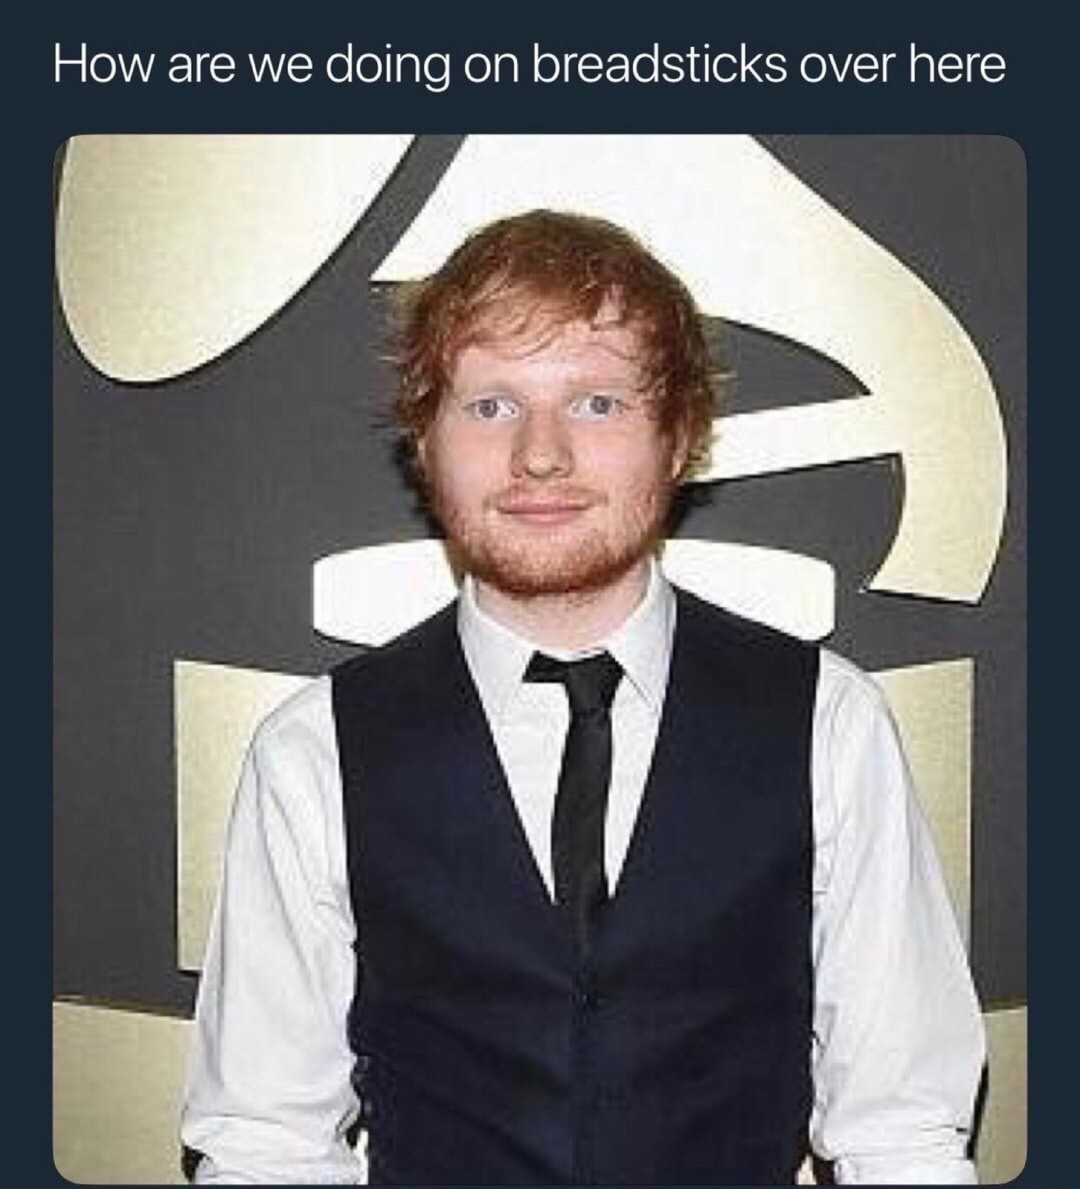 lady gaga mistakes ed sheeran for waiter - How are we doing on breadsticks over here